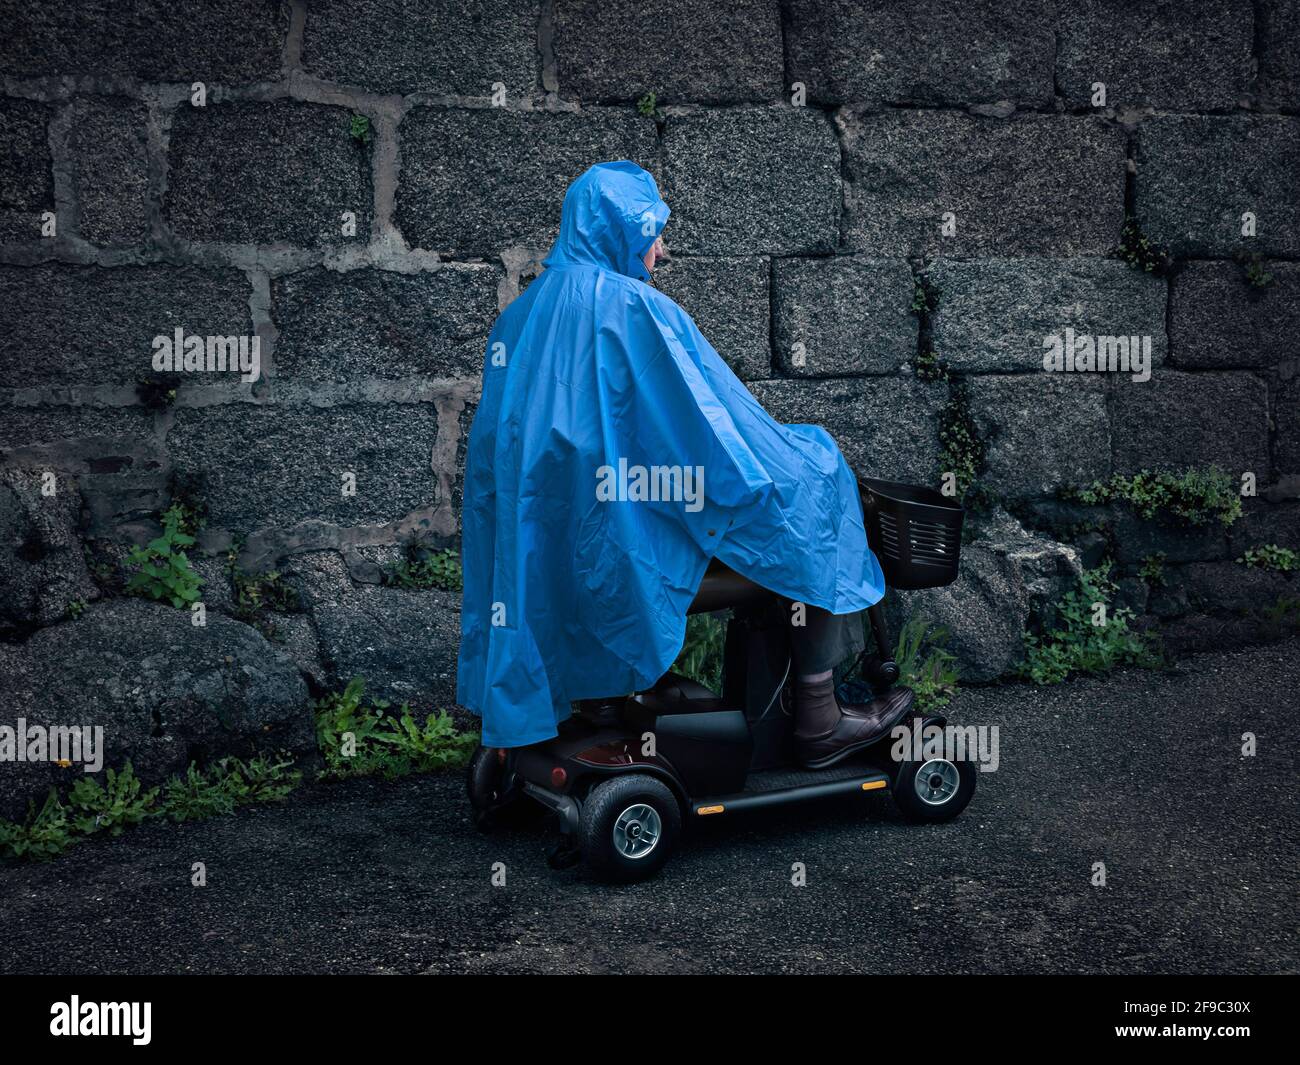 Cagoule High Resolution Stock Photography and Images - Alamy